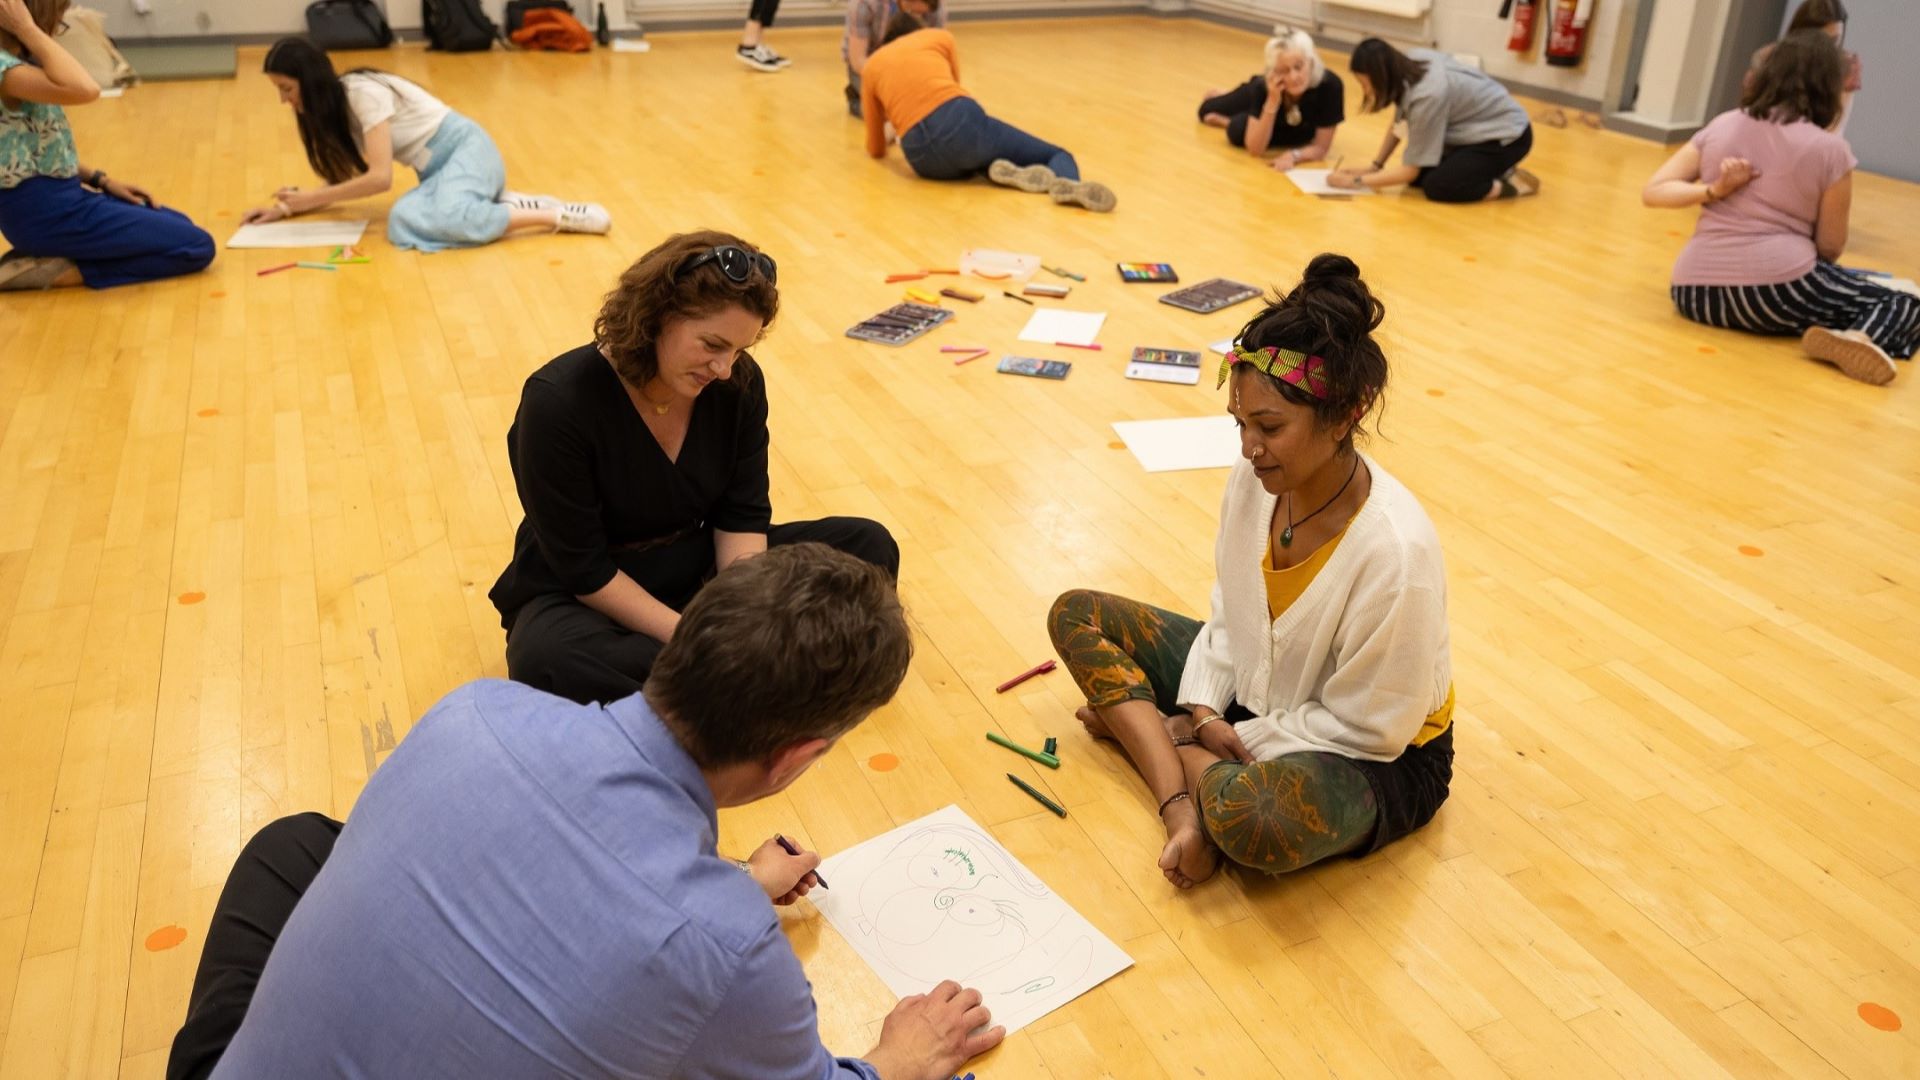 A group of people sitting on the floor using creative therapy. They are drawing.